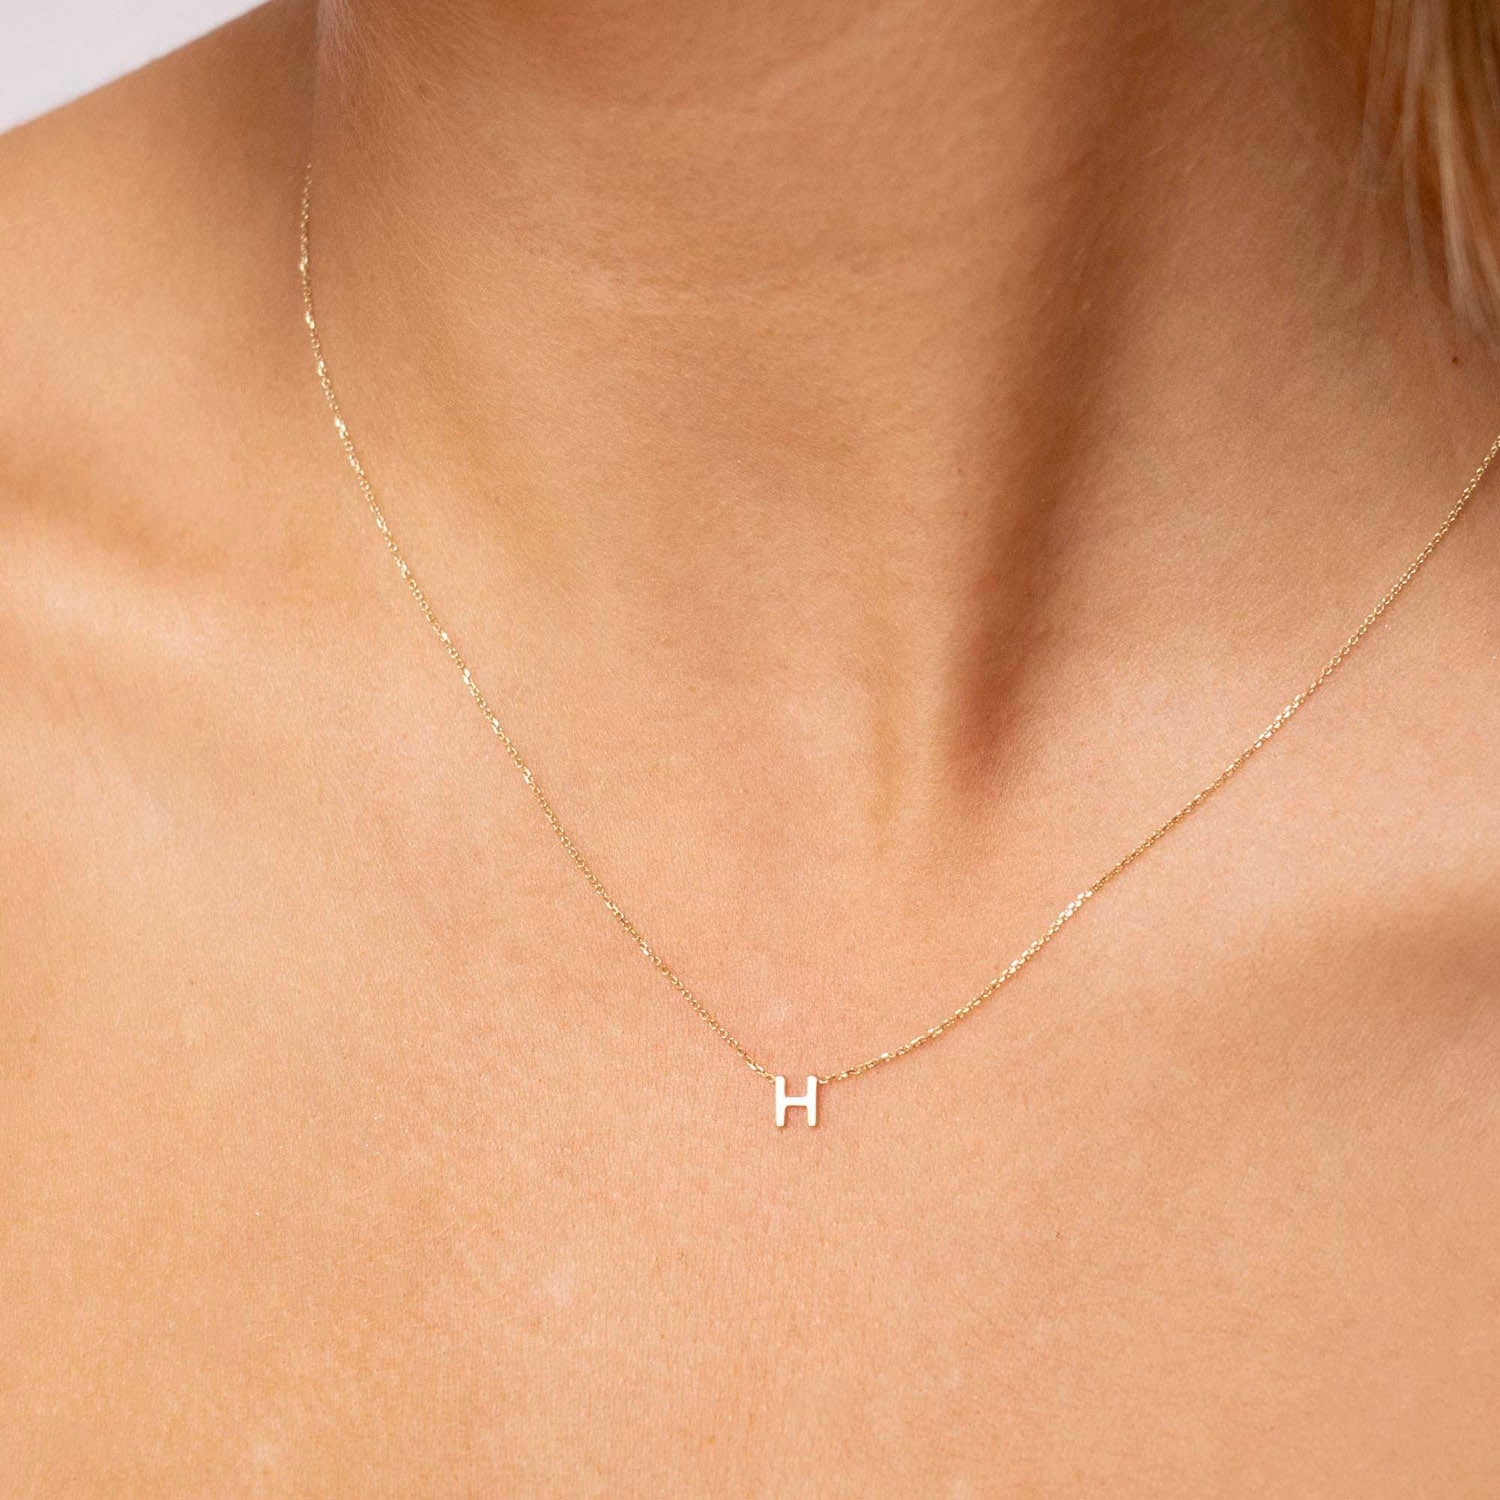 Buy H Initial Necklace, Gold Initial Necklace, Letter H Necklace, Initial  Necklace, Personalized Necklace, Dainty Gold Letter H, Gift for Her Online  in India - Etsy